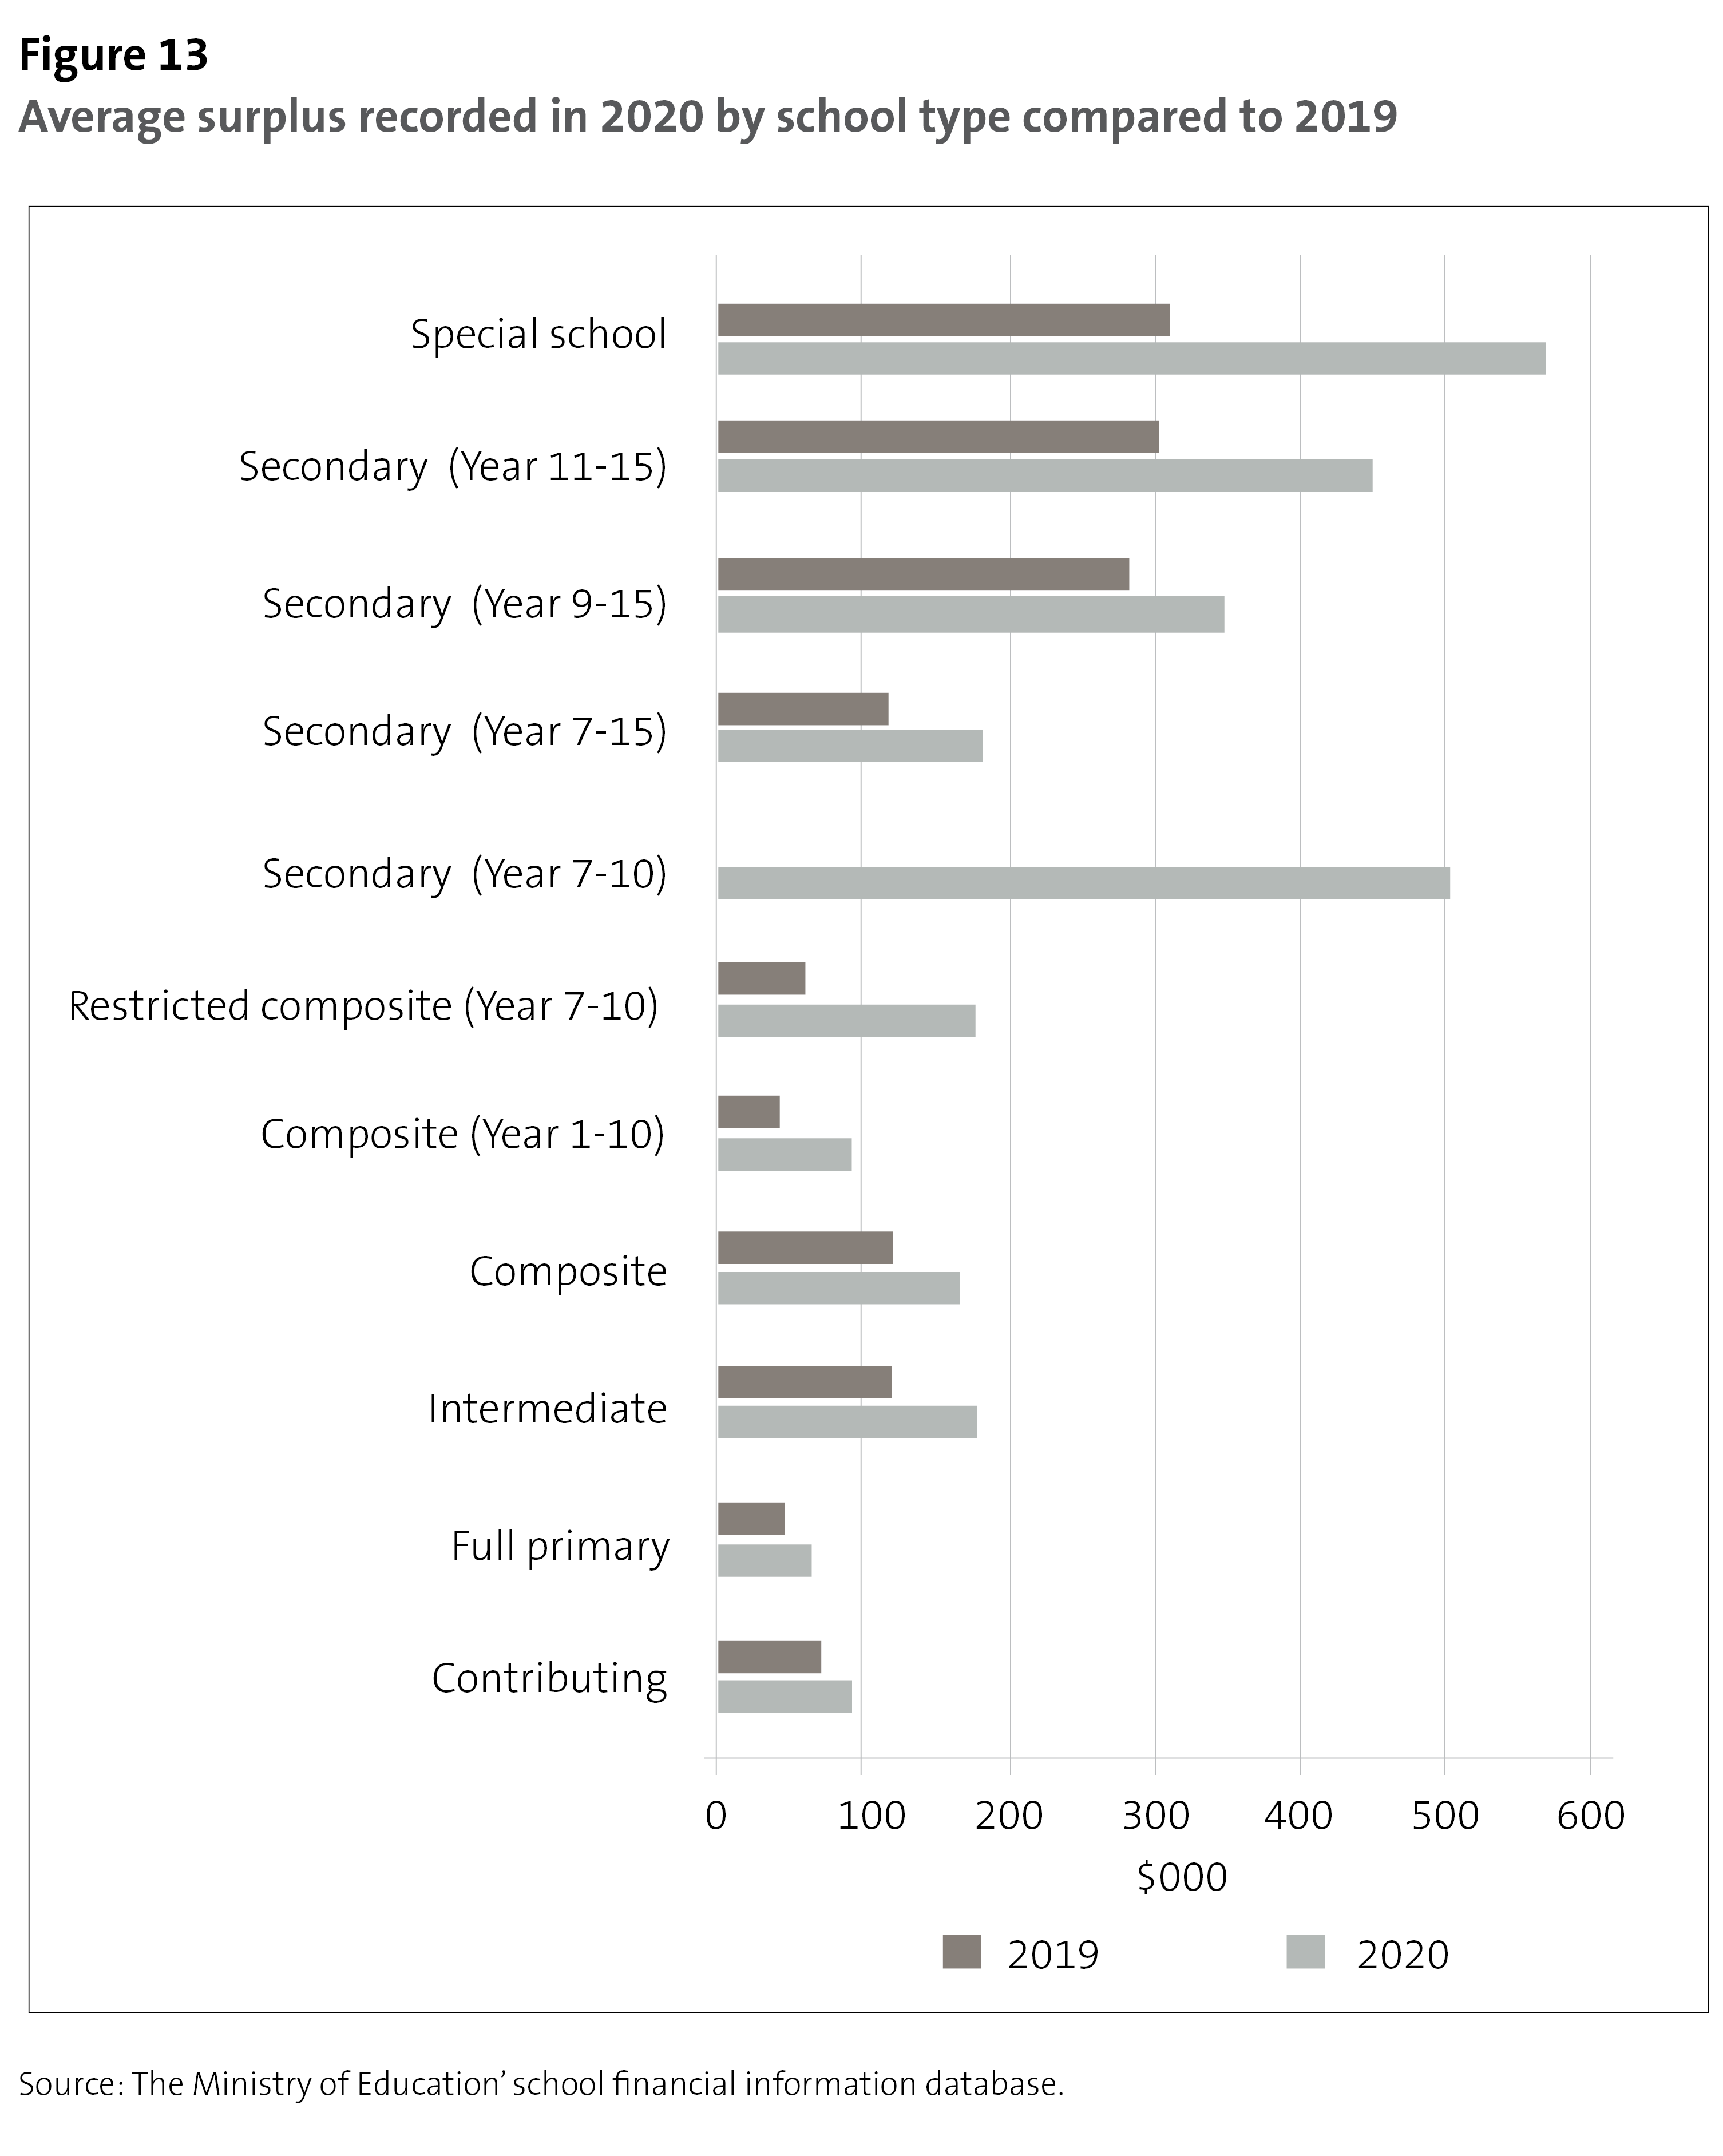 Figure 13 - Average surplus recorded in 2020 by school type compared to 2019